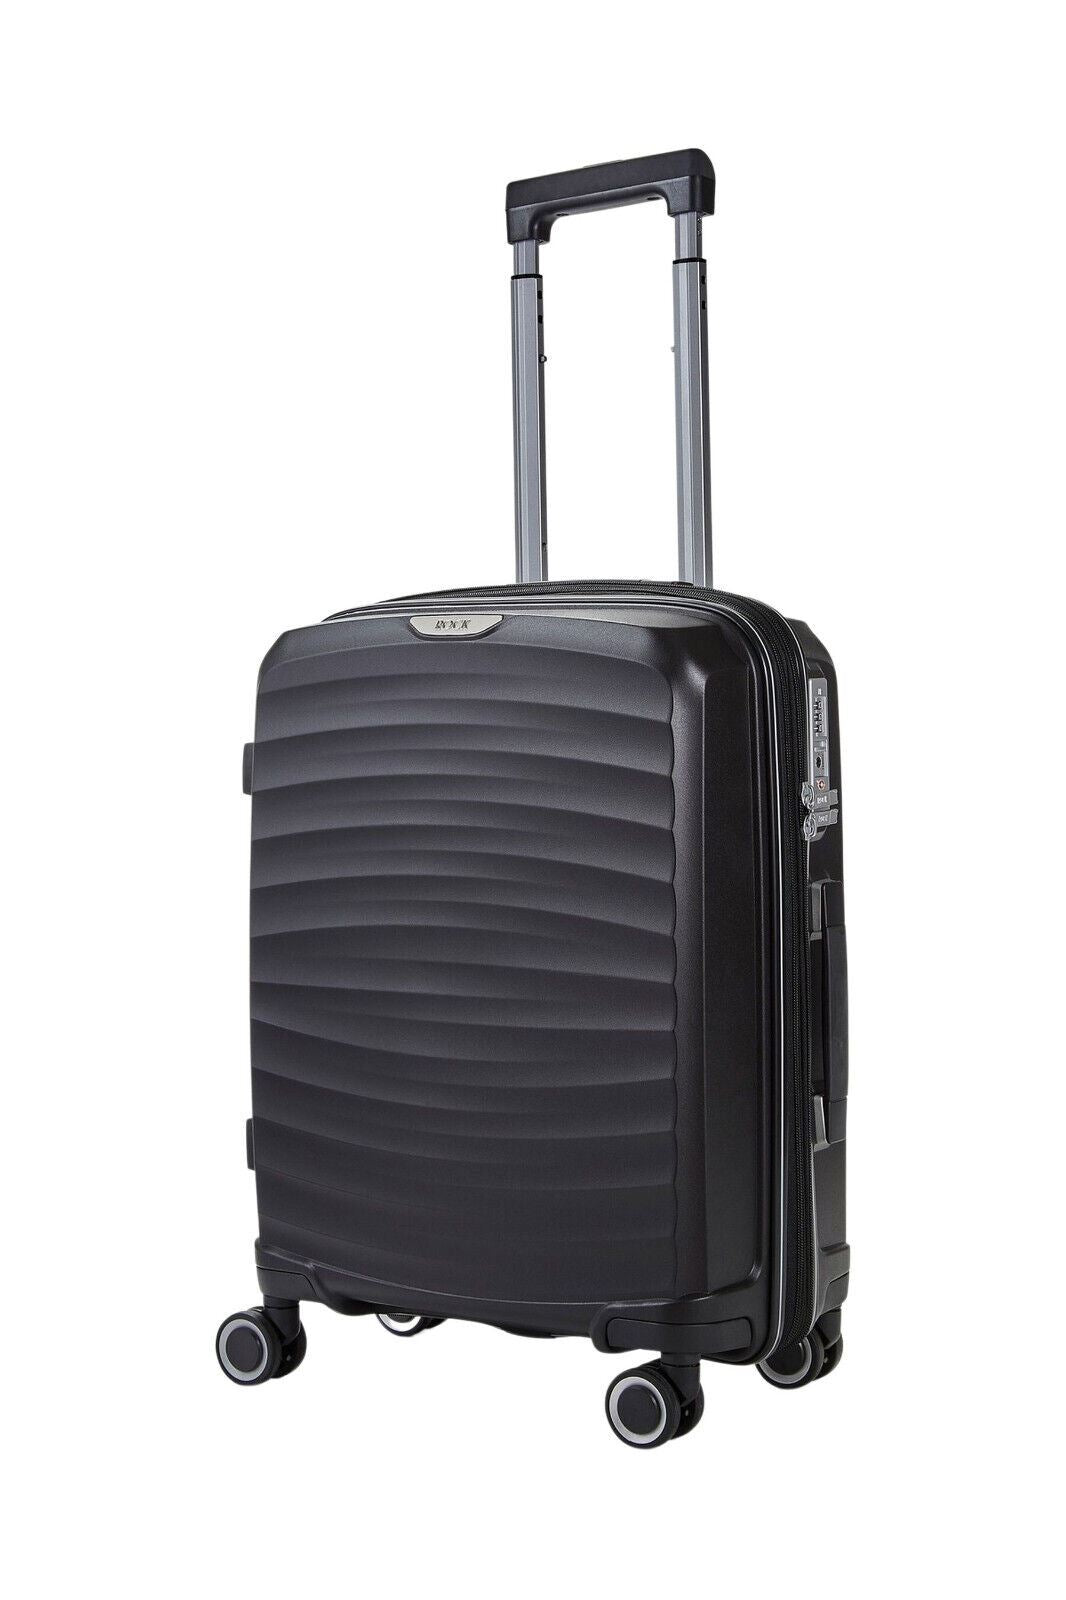 Hard Shell Classic Suitcase 8 Wheel Cabin Luggage Trolley Travel Bag